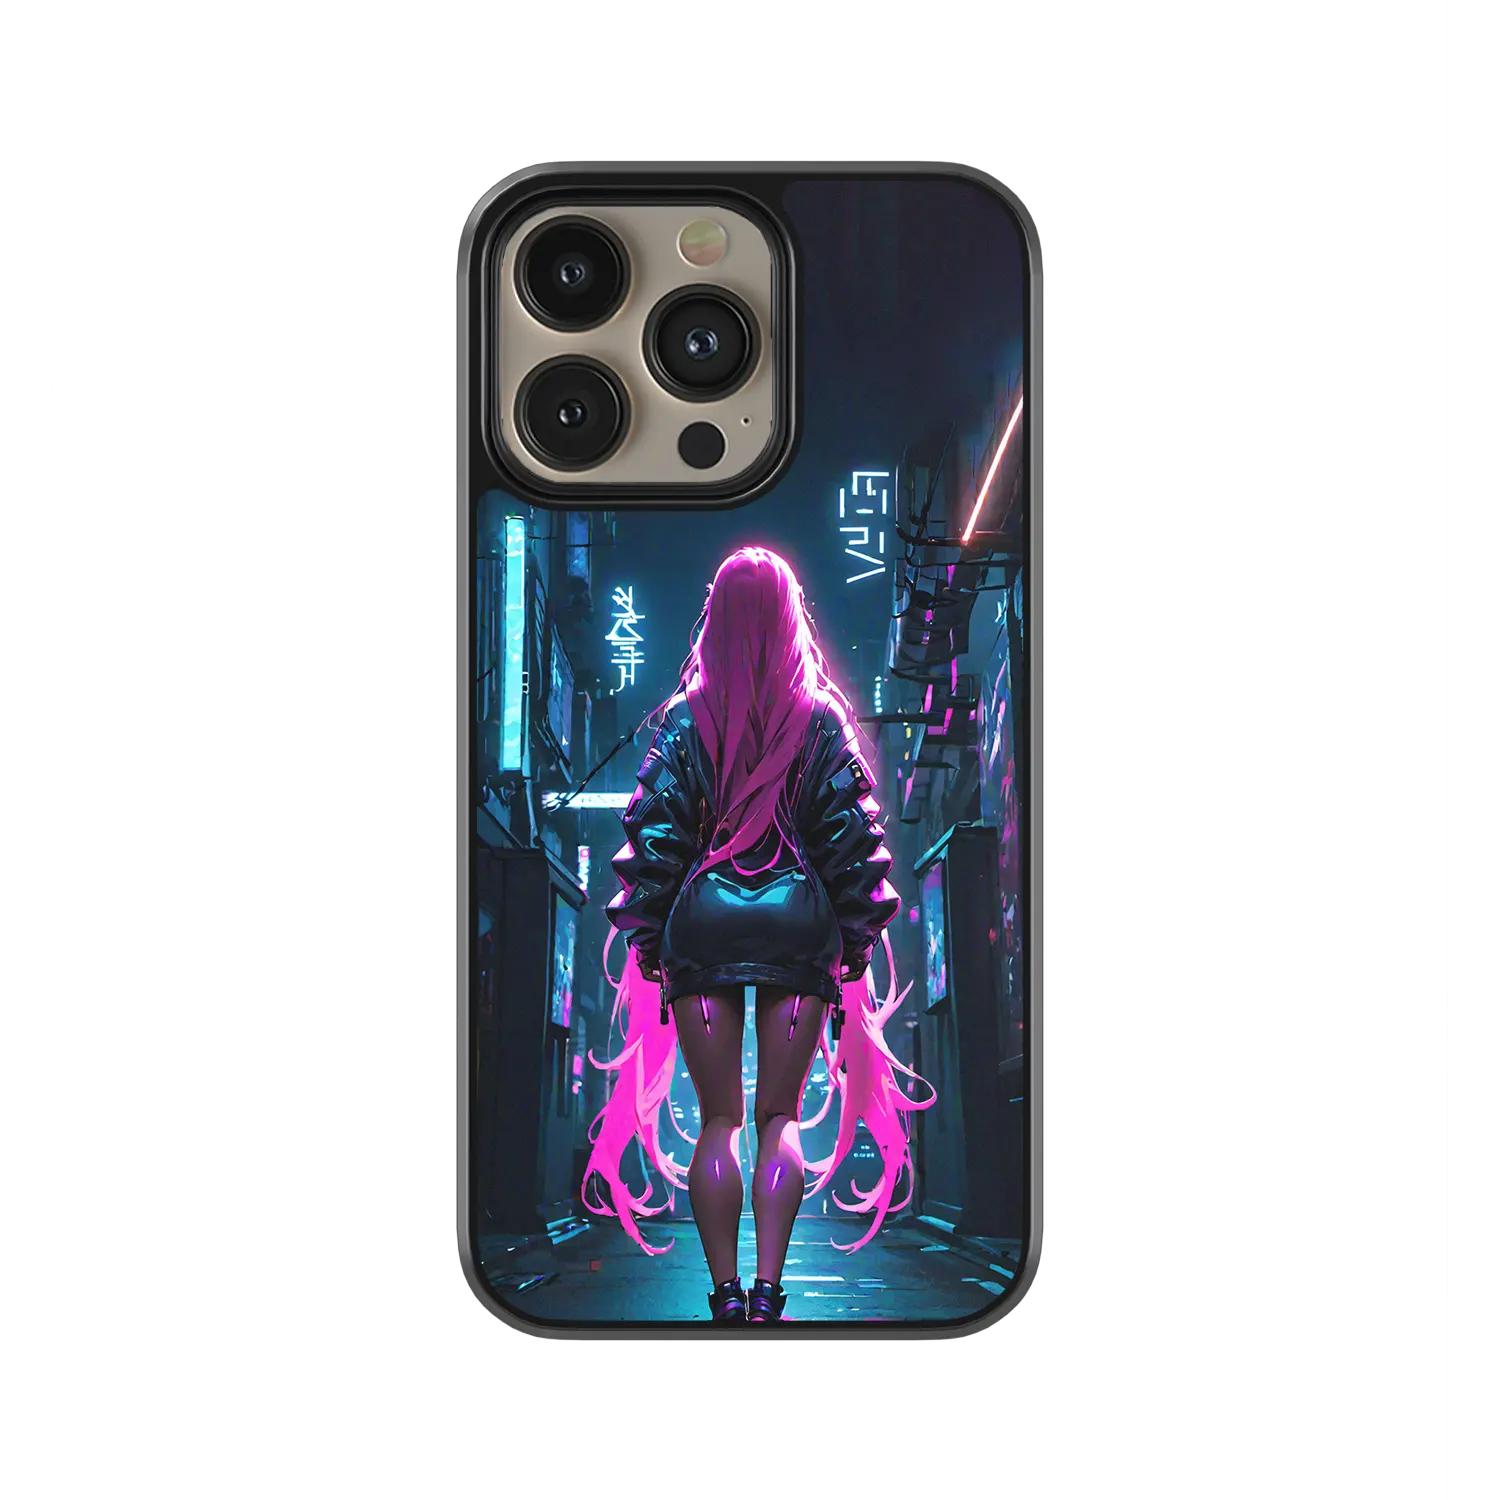 Tokyo Nights iphone 11 pro cover